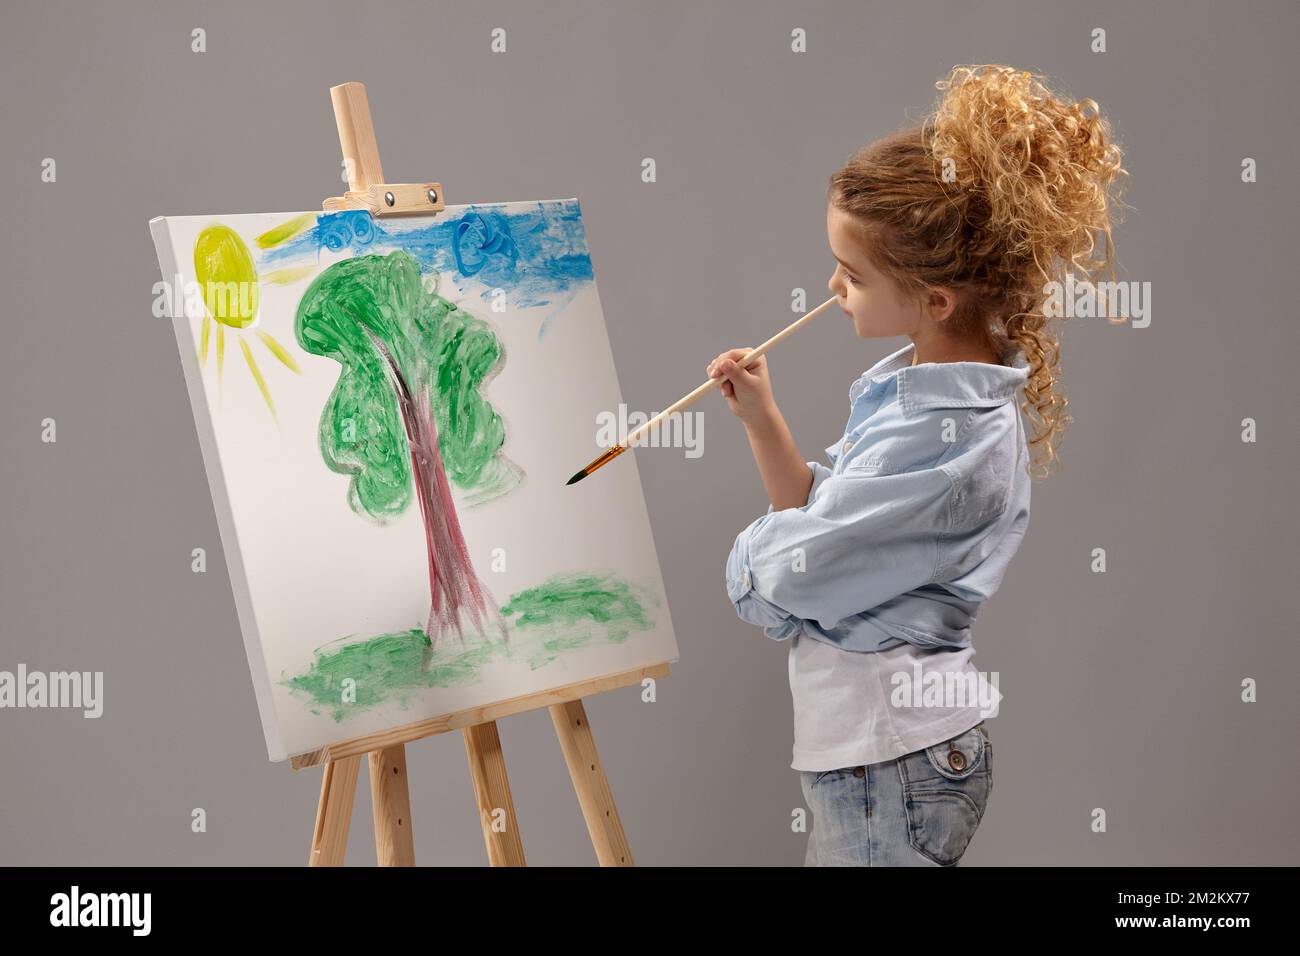 Charming school girl is painting with a watercolor brush on an easel, standing on a gray background. Stock Photo